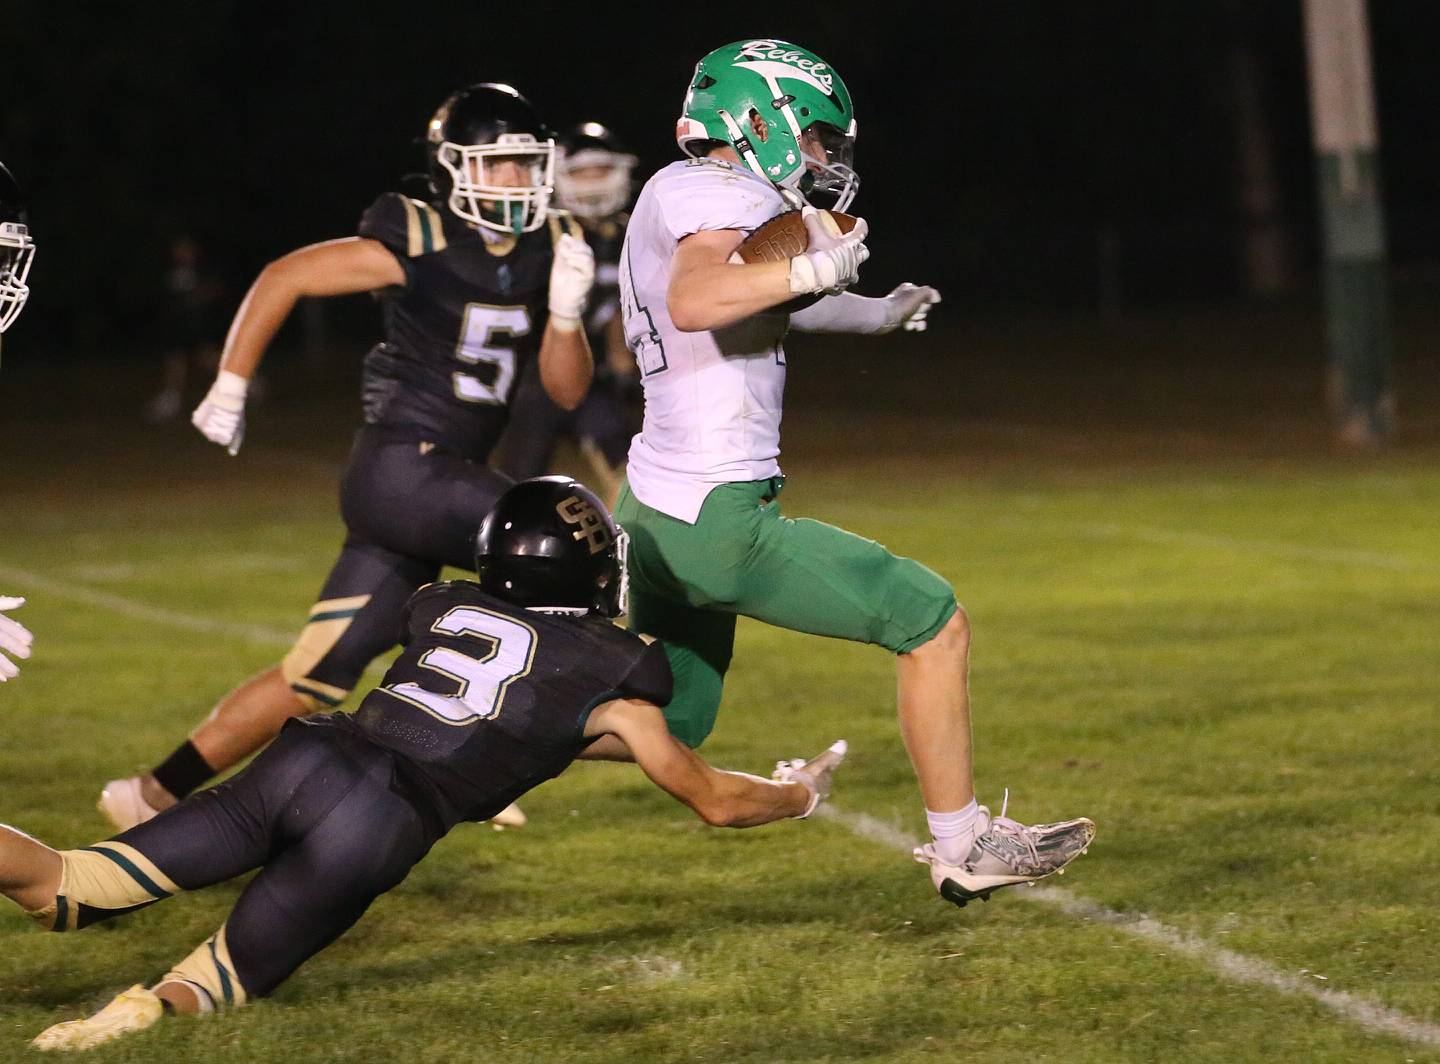 Ridgewood's Niall Kenny runs into the endzone as he is chased down by St. Bede's Halden Hueneburg and Hunter Savage on Friday, Sept. 15, 2023 at St. Bede Academy.